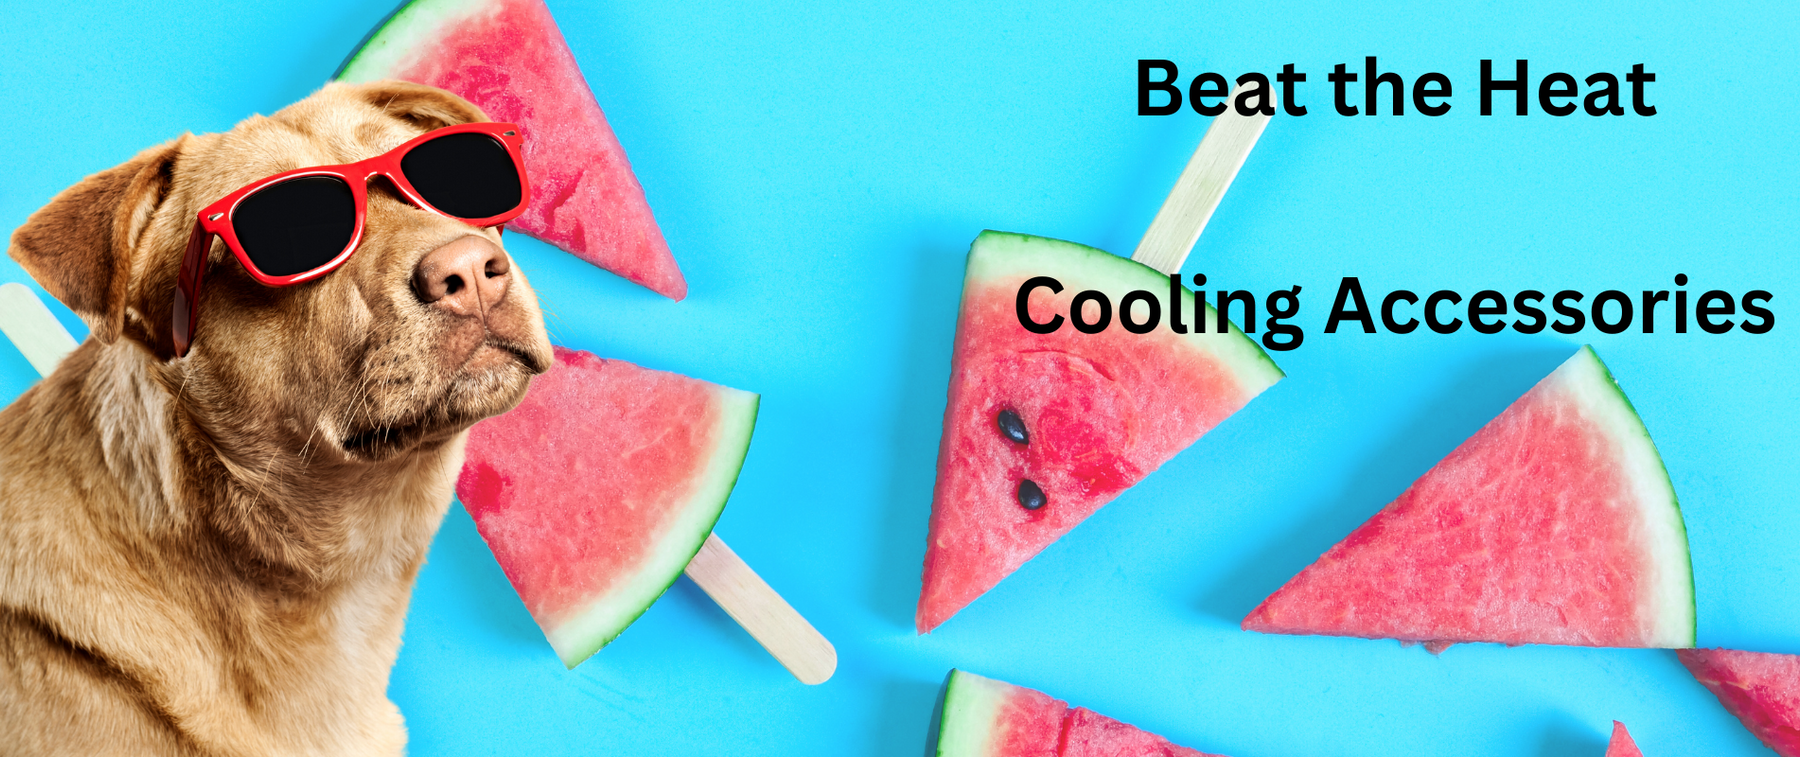 Beat The Heat This Summer with Cooling Accessories